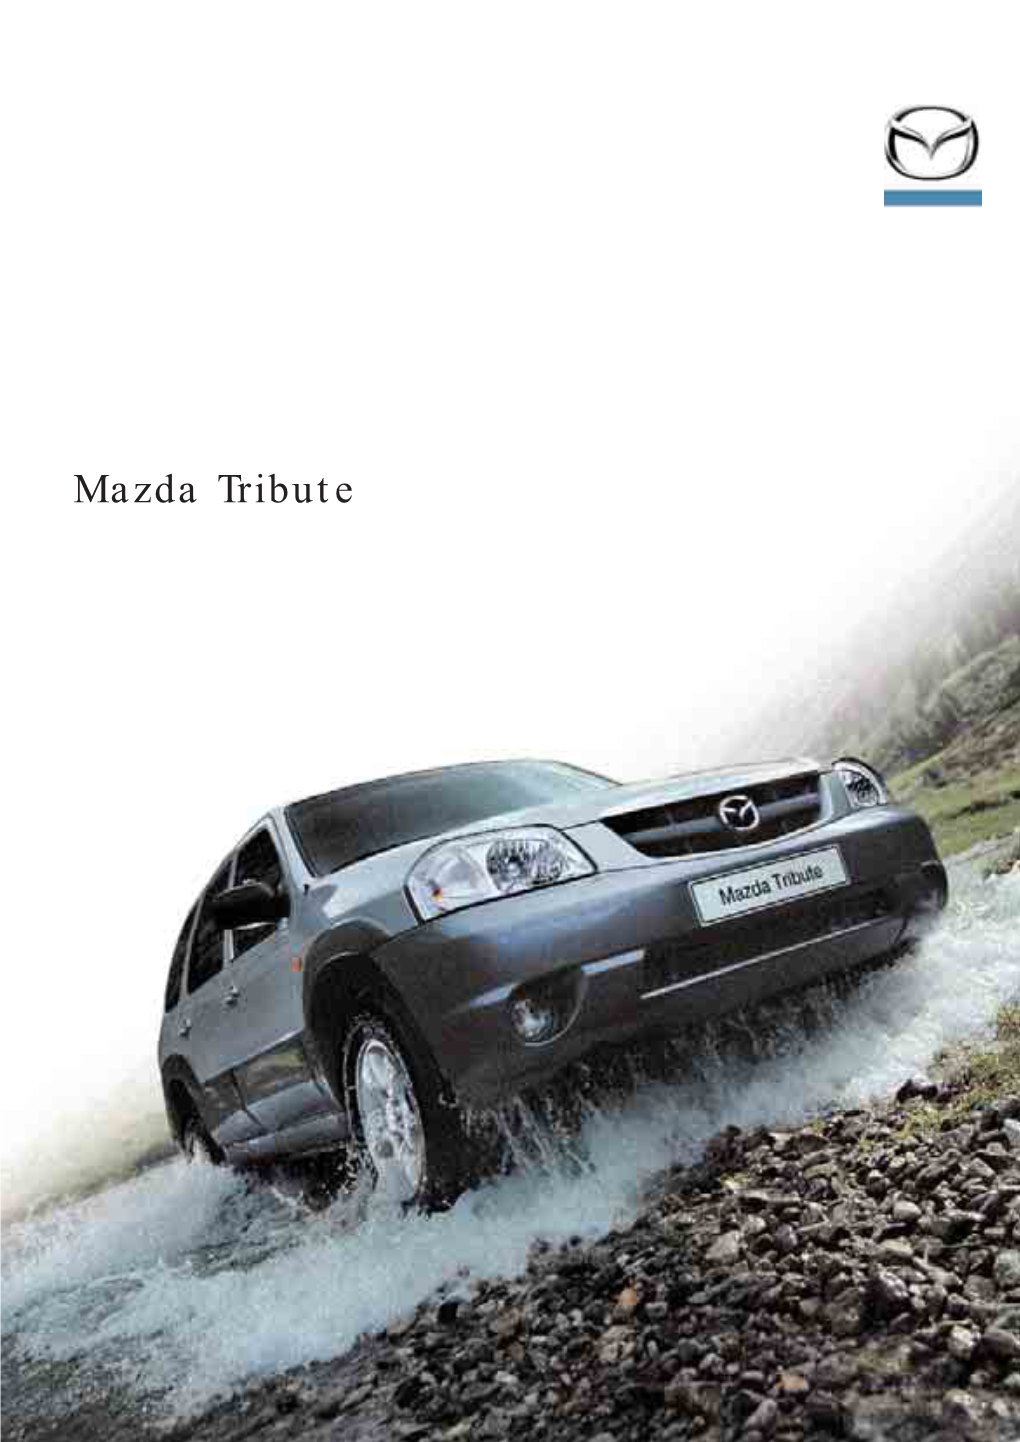 Mazda Tribute in 1989 We Introduced the World’S Most Successful Roadster: the Mazda MX-5